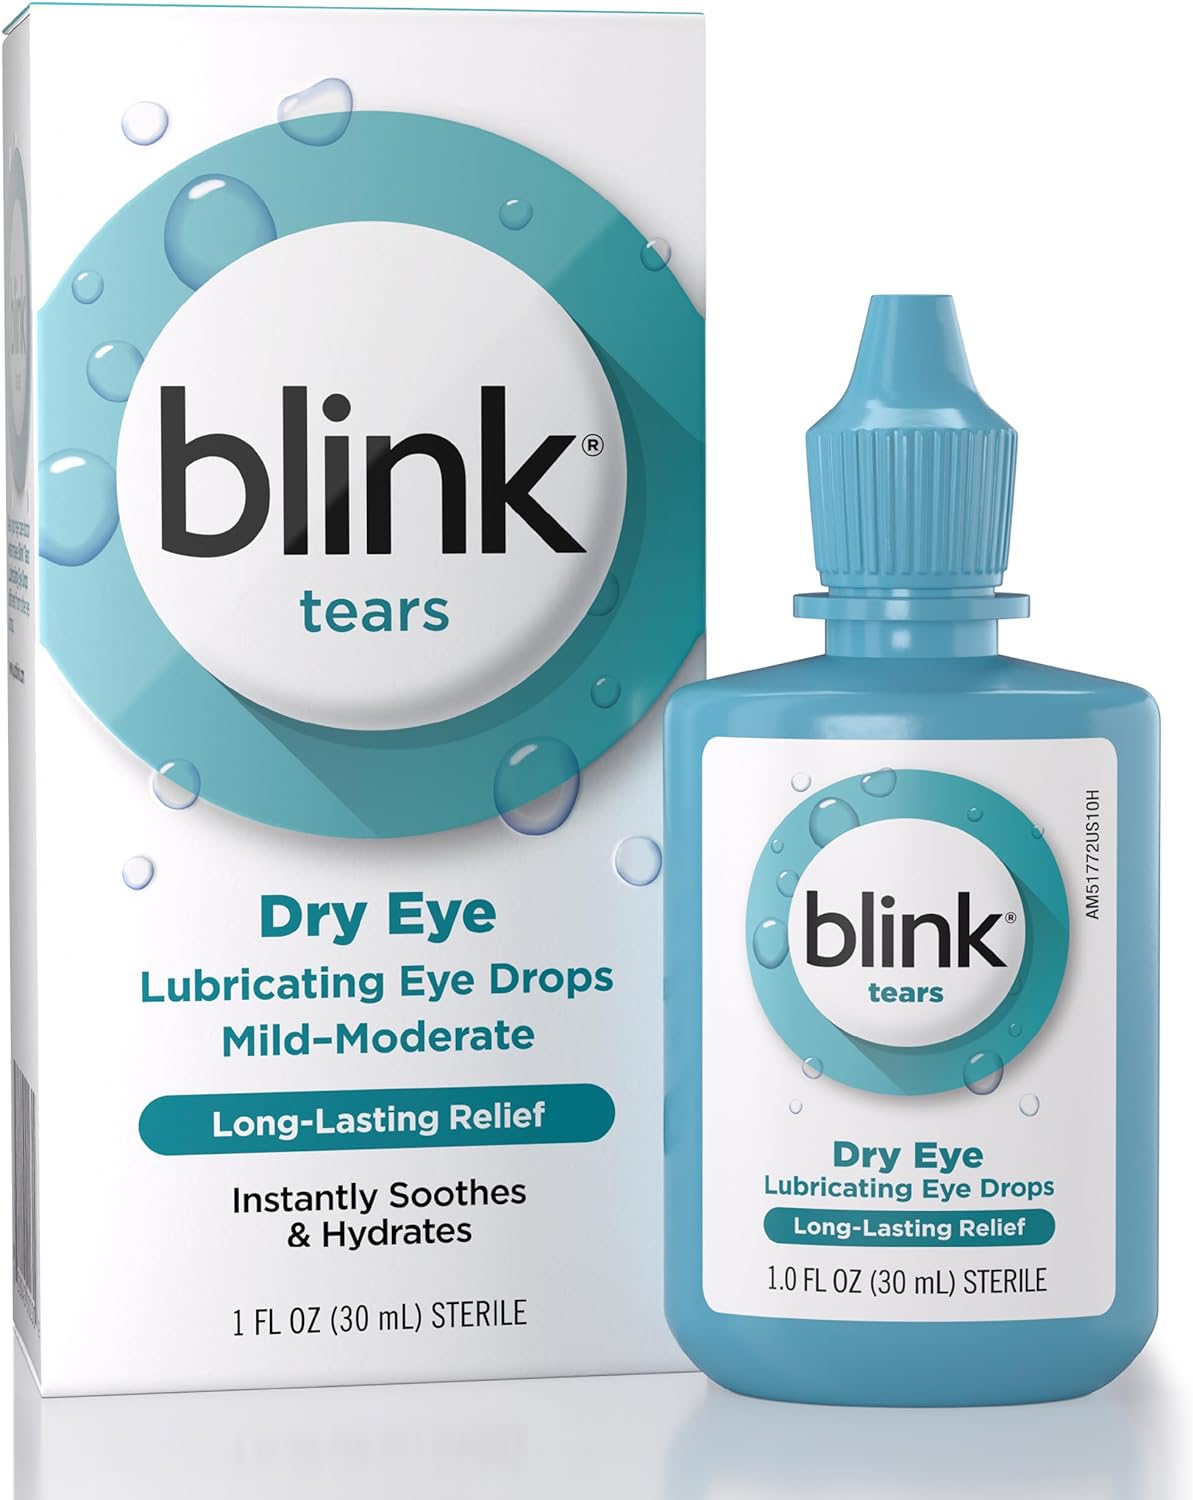 Very thick, and very comfortable eye drops that restore much-needed moisture back to your eyes. Stays lubricated for hours. Better than most cheaper brands and worth the higher price to be sure.